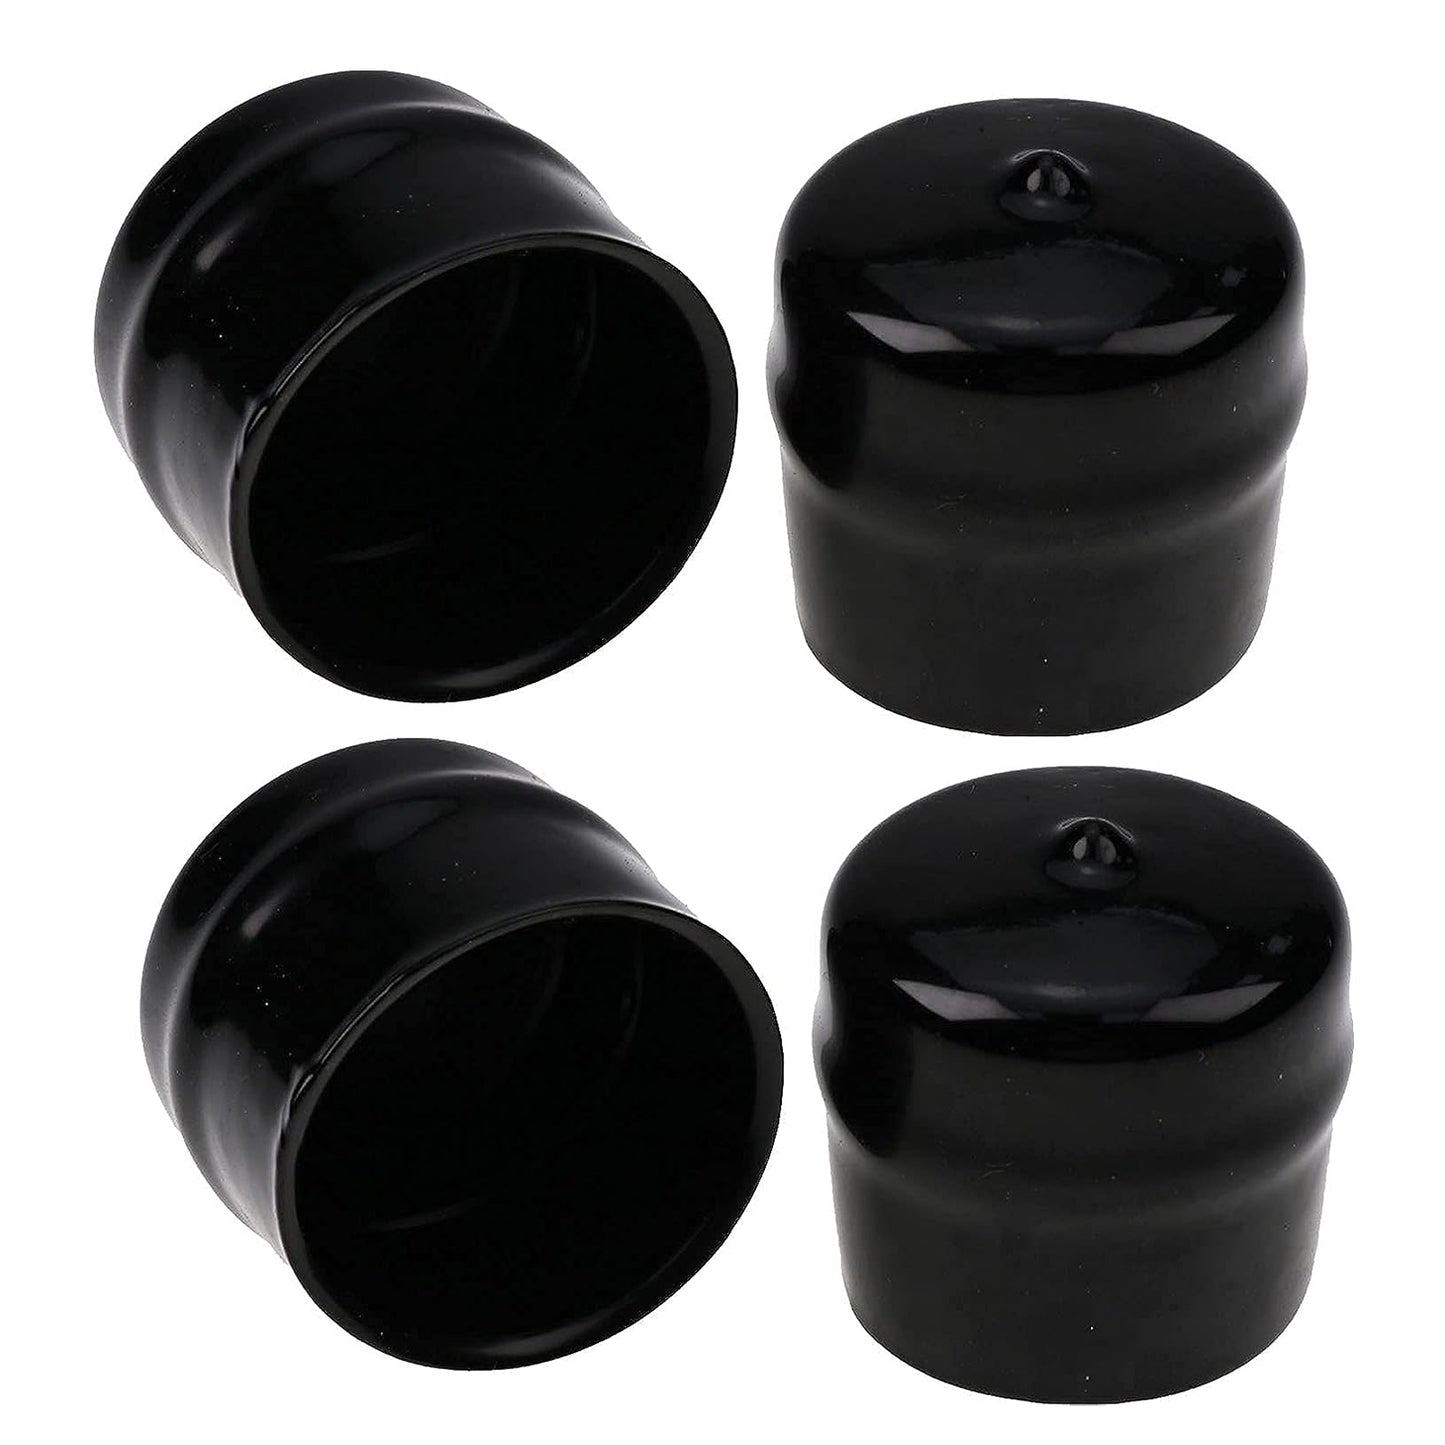 4PCS 532104757 Rubber Wheel Axle Hub Caps Compatible with Husqvarna, Weed Eater